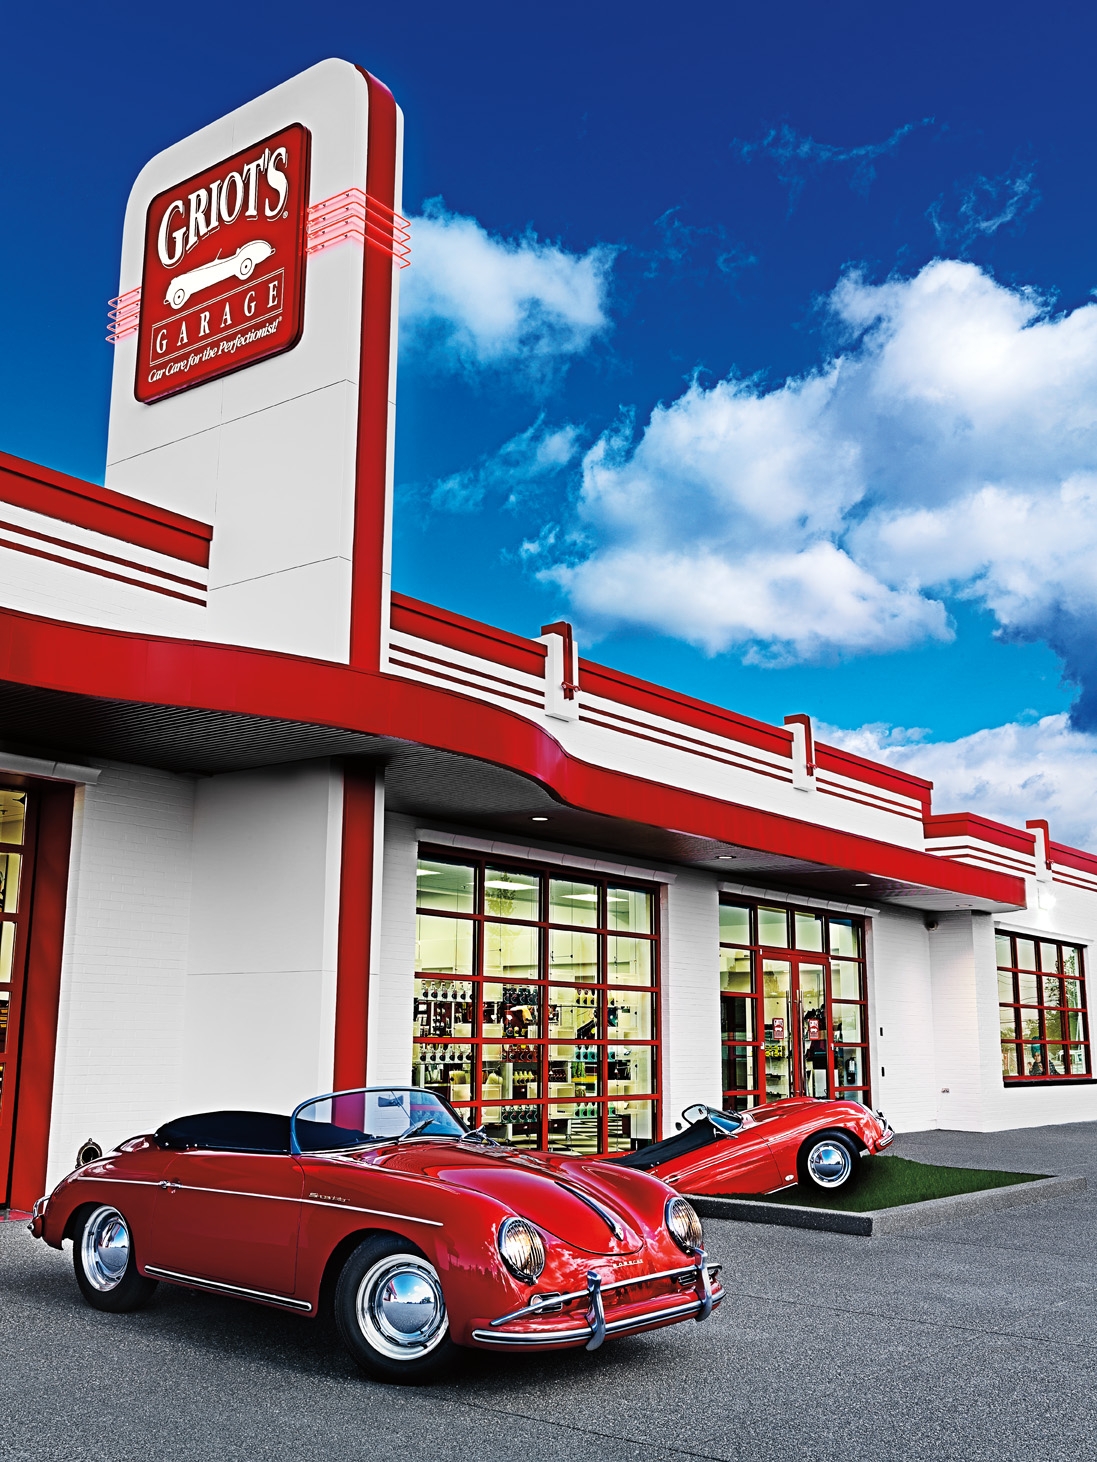 Outdoor shot of Griot's Garage Tacoma location with 2 red cars for Griot's Fall 2010 Catalog